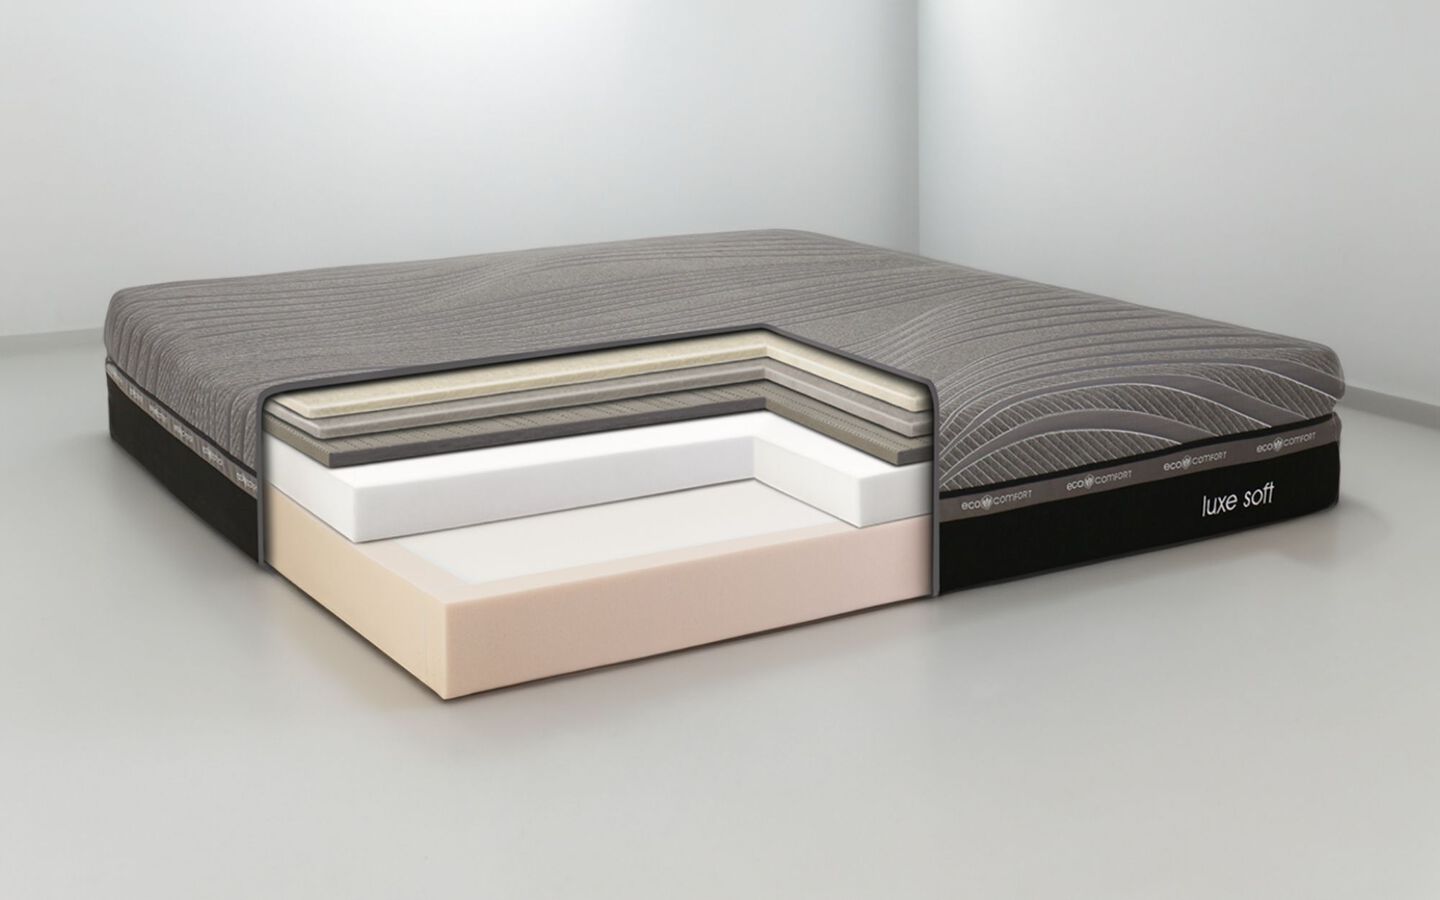 ecocomfort luxe soft mattress with inner layer visuals